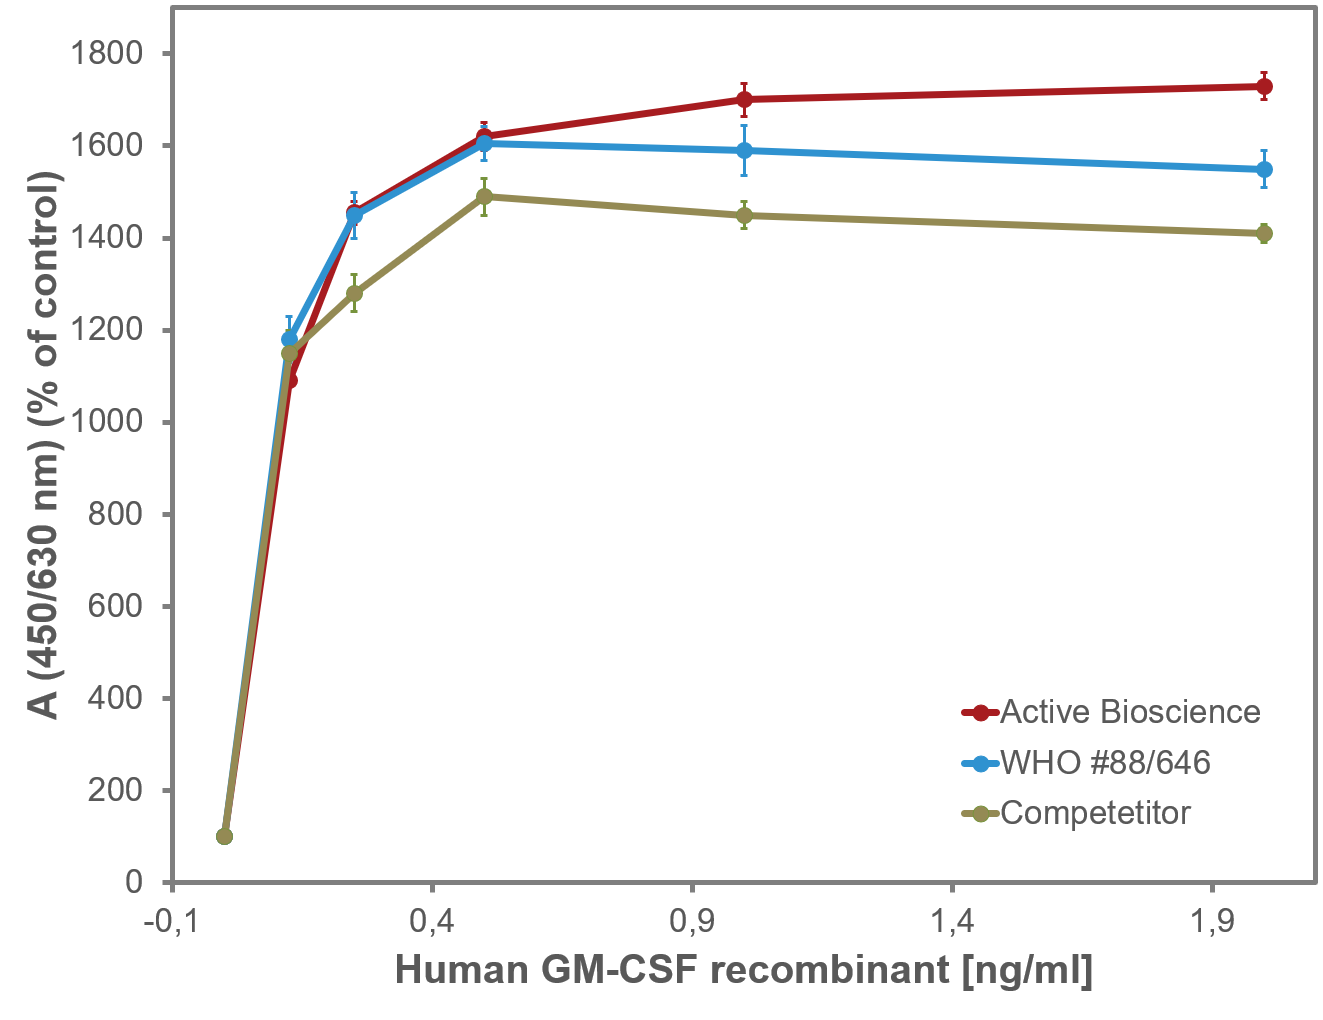 <strong>Fig. 2</strong>: Dose-dependent stimulation of cell proliferation in TF-1 cells by recombinant Human GM-CSF, cct-premium and the WHO standard 88/646. Values are the means (�SD) of triplicate determinations and expressed as percentage of control.